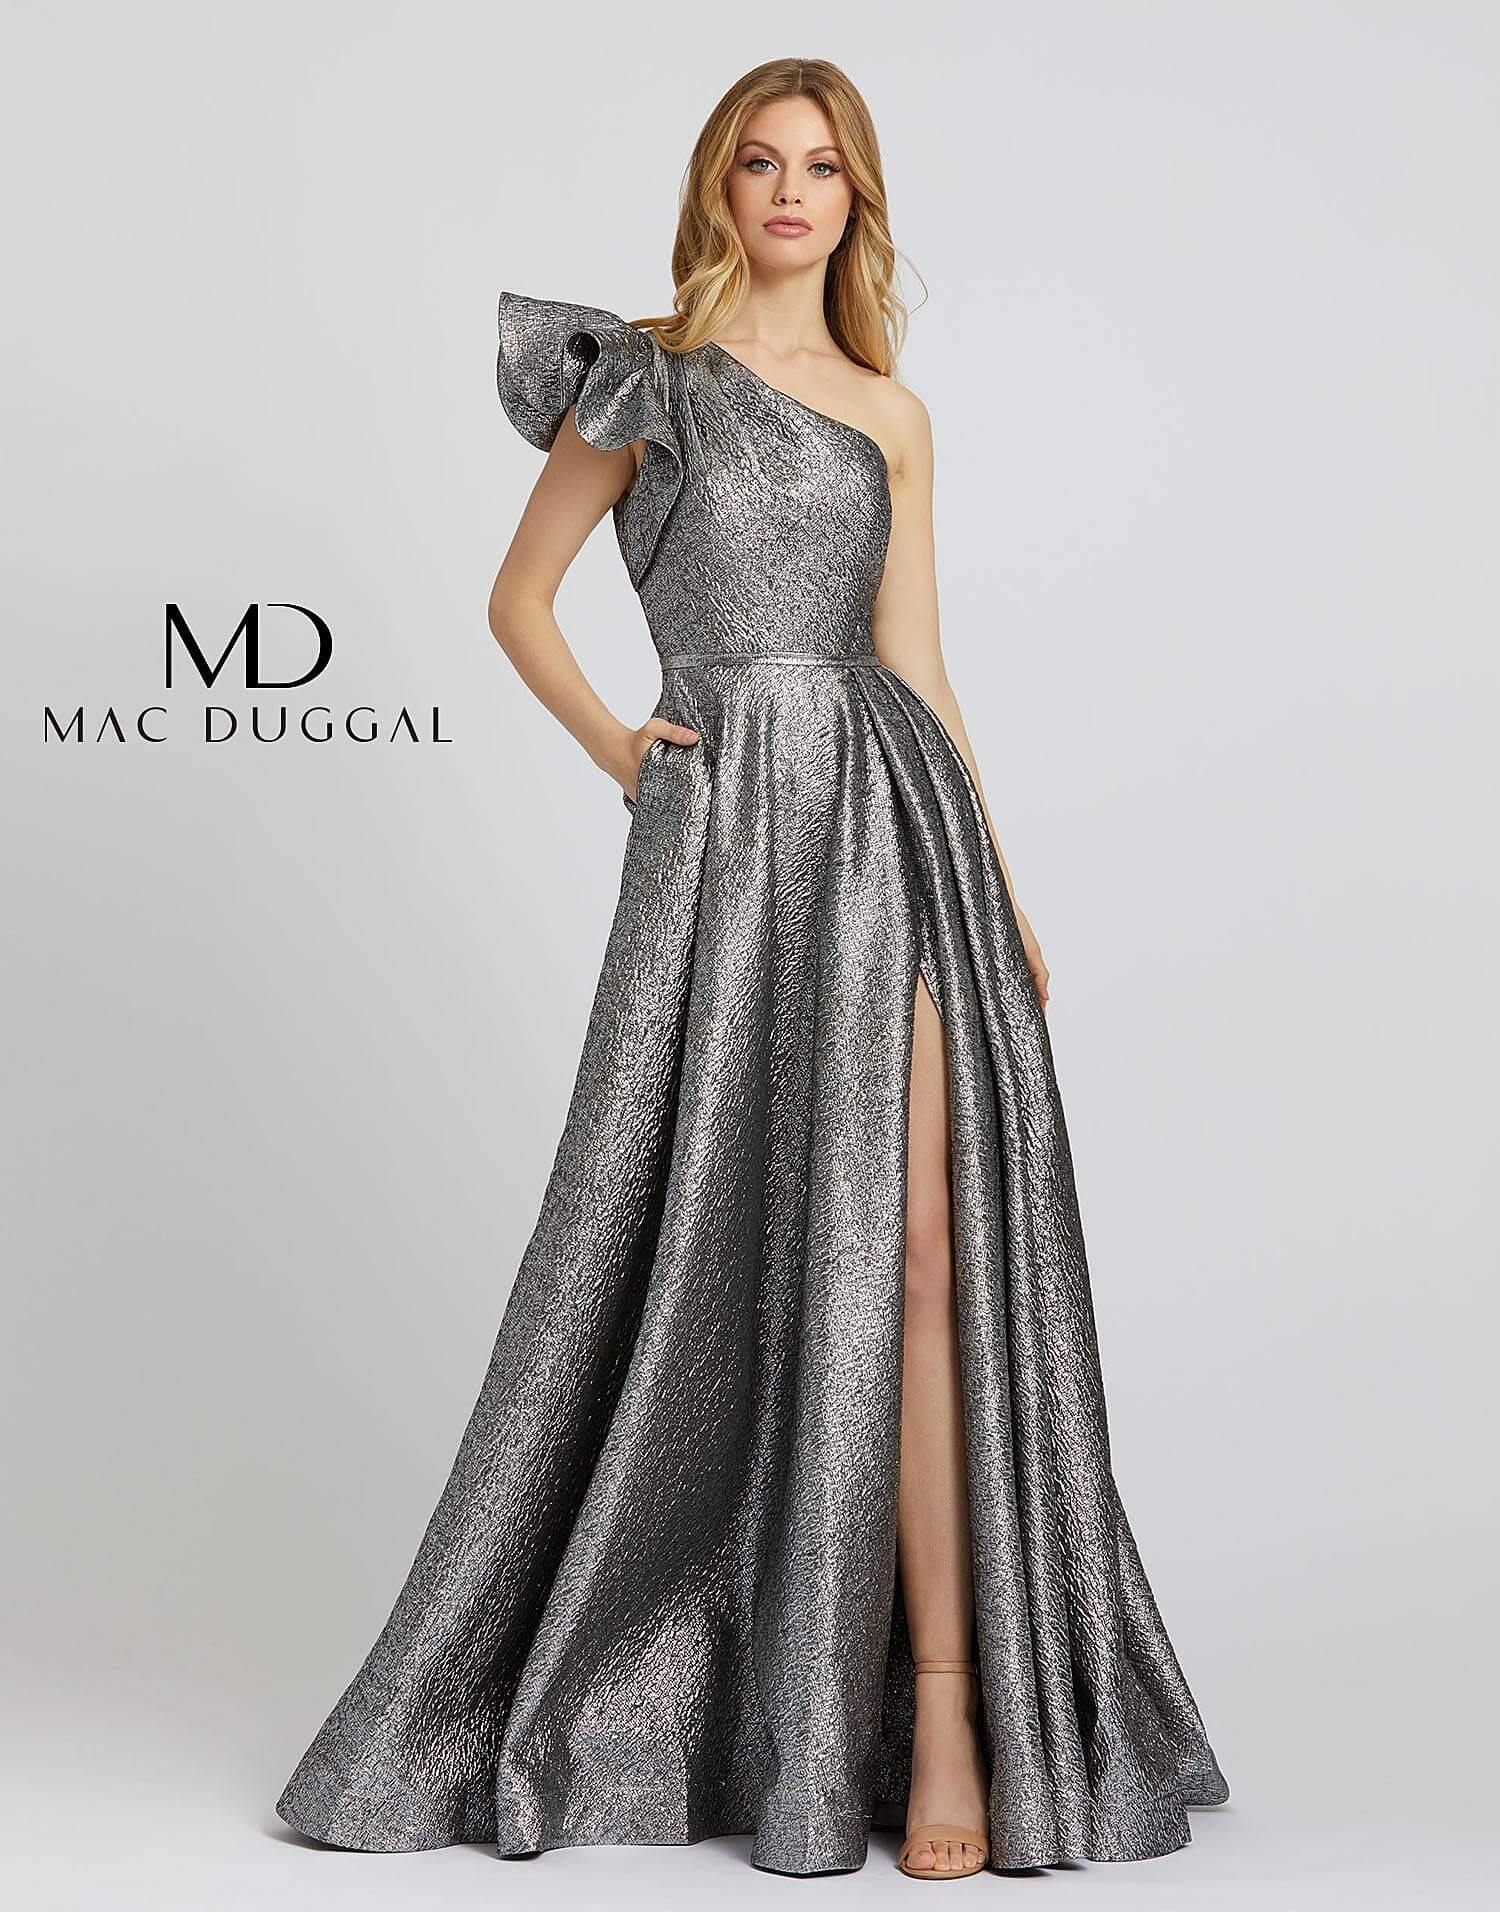 Mac Duggal 5217 Long Mother of the Bride Dress for $399.0 – The Dress Outlet